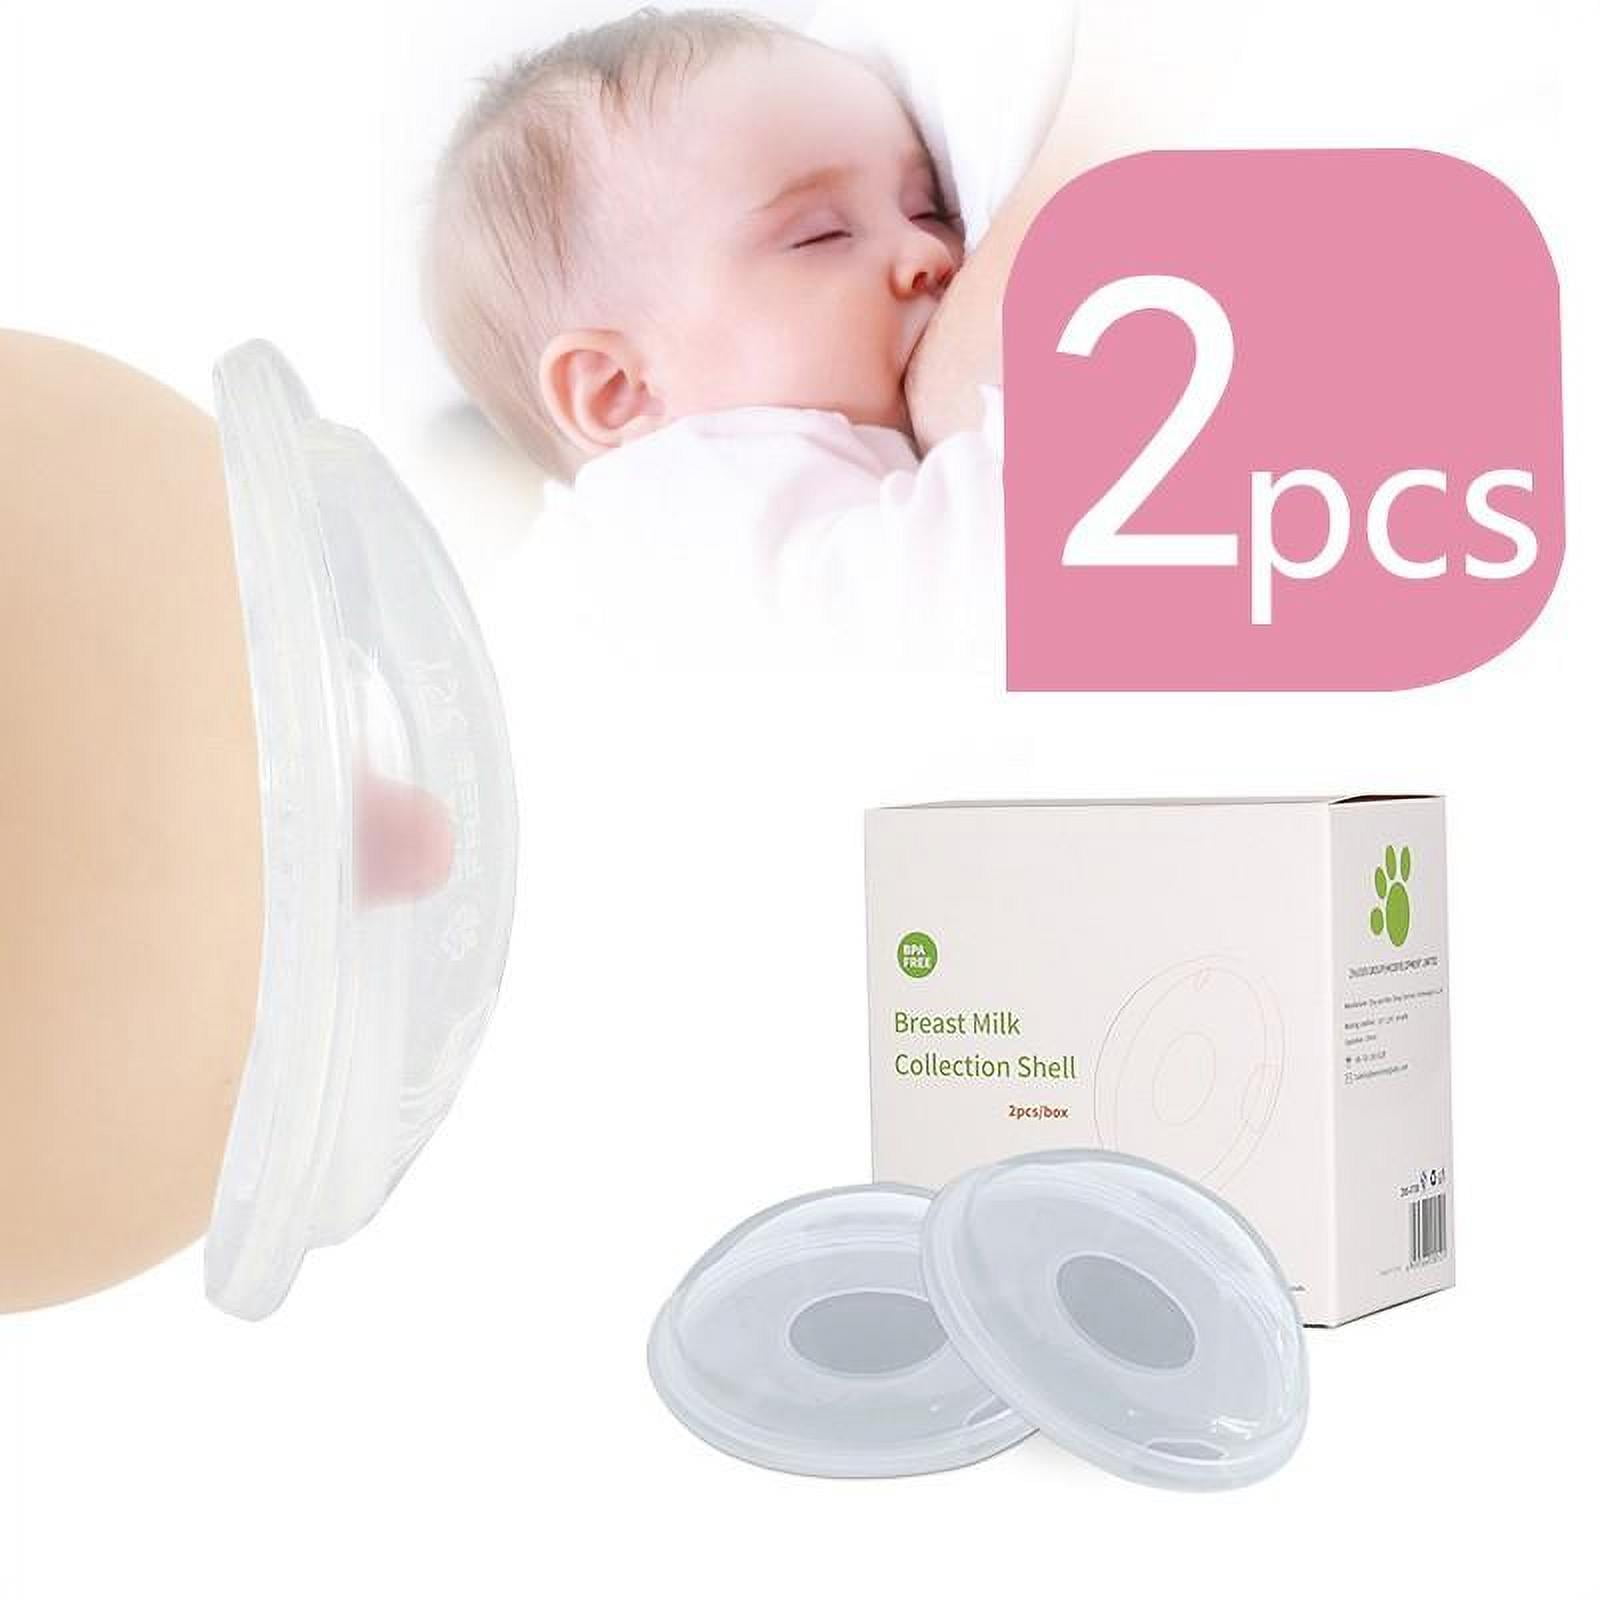 Lansinoh TheraPearl Breast Therapy Pack Breastfeeding Essentials -  AliExpress